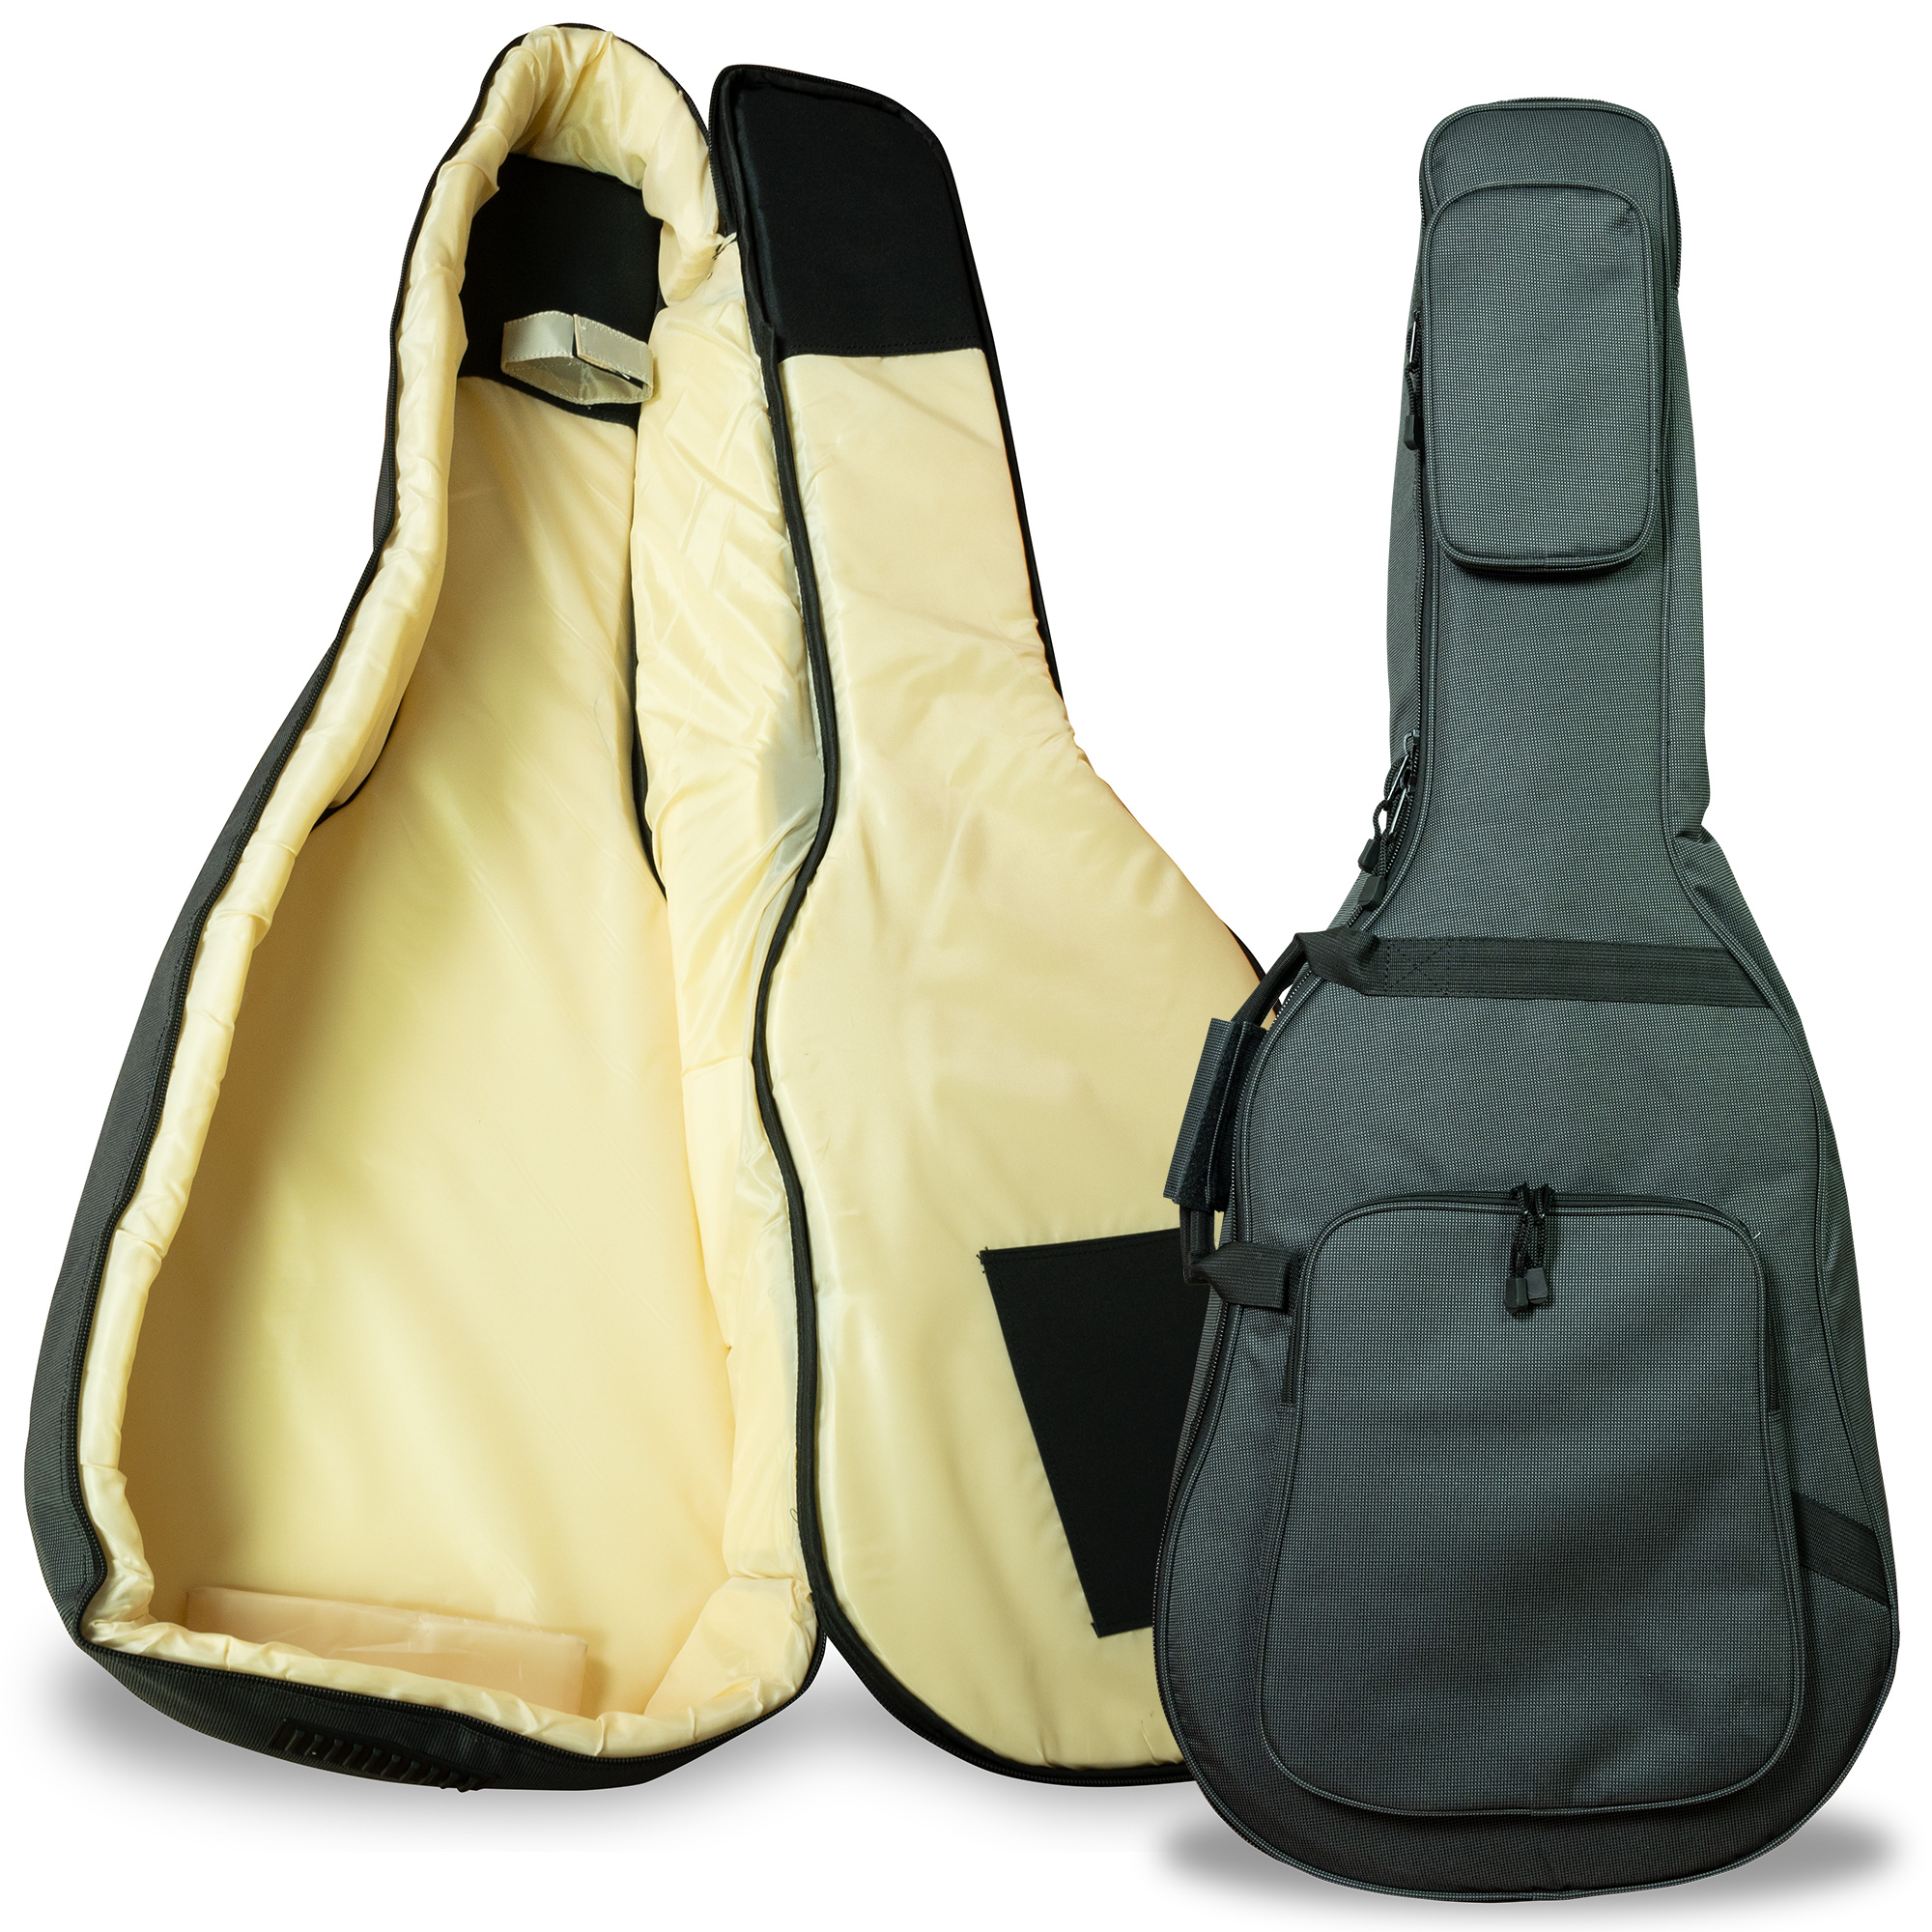 20mm-Padded Deluxe Guitar Gig Bag in action